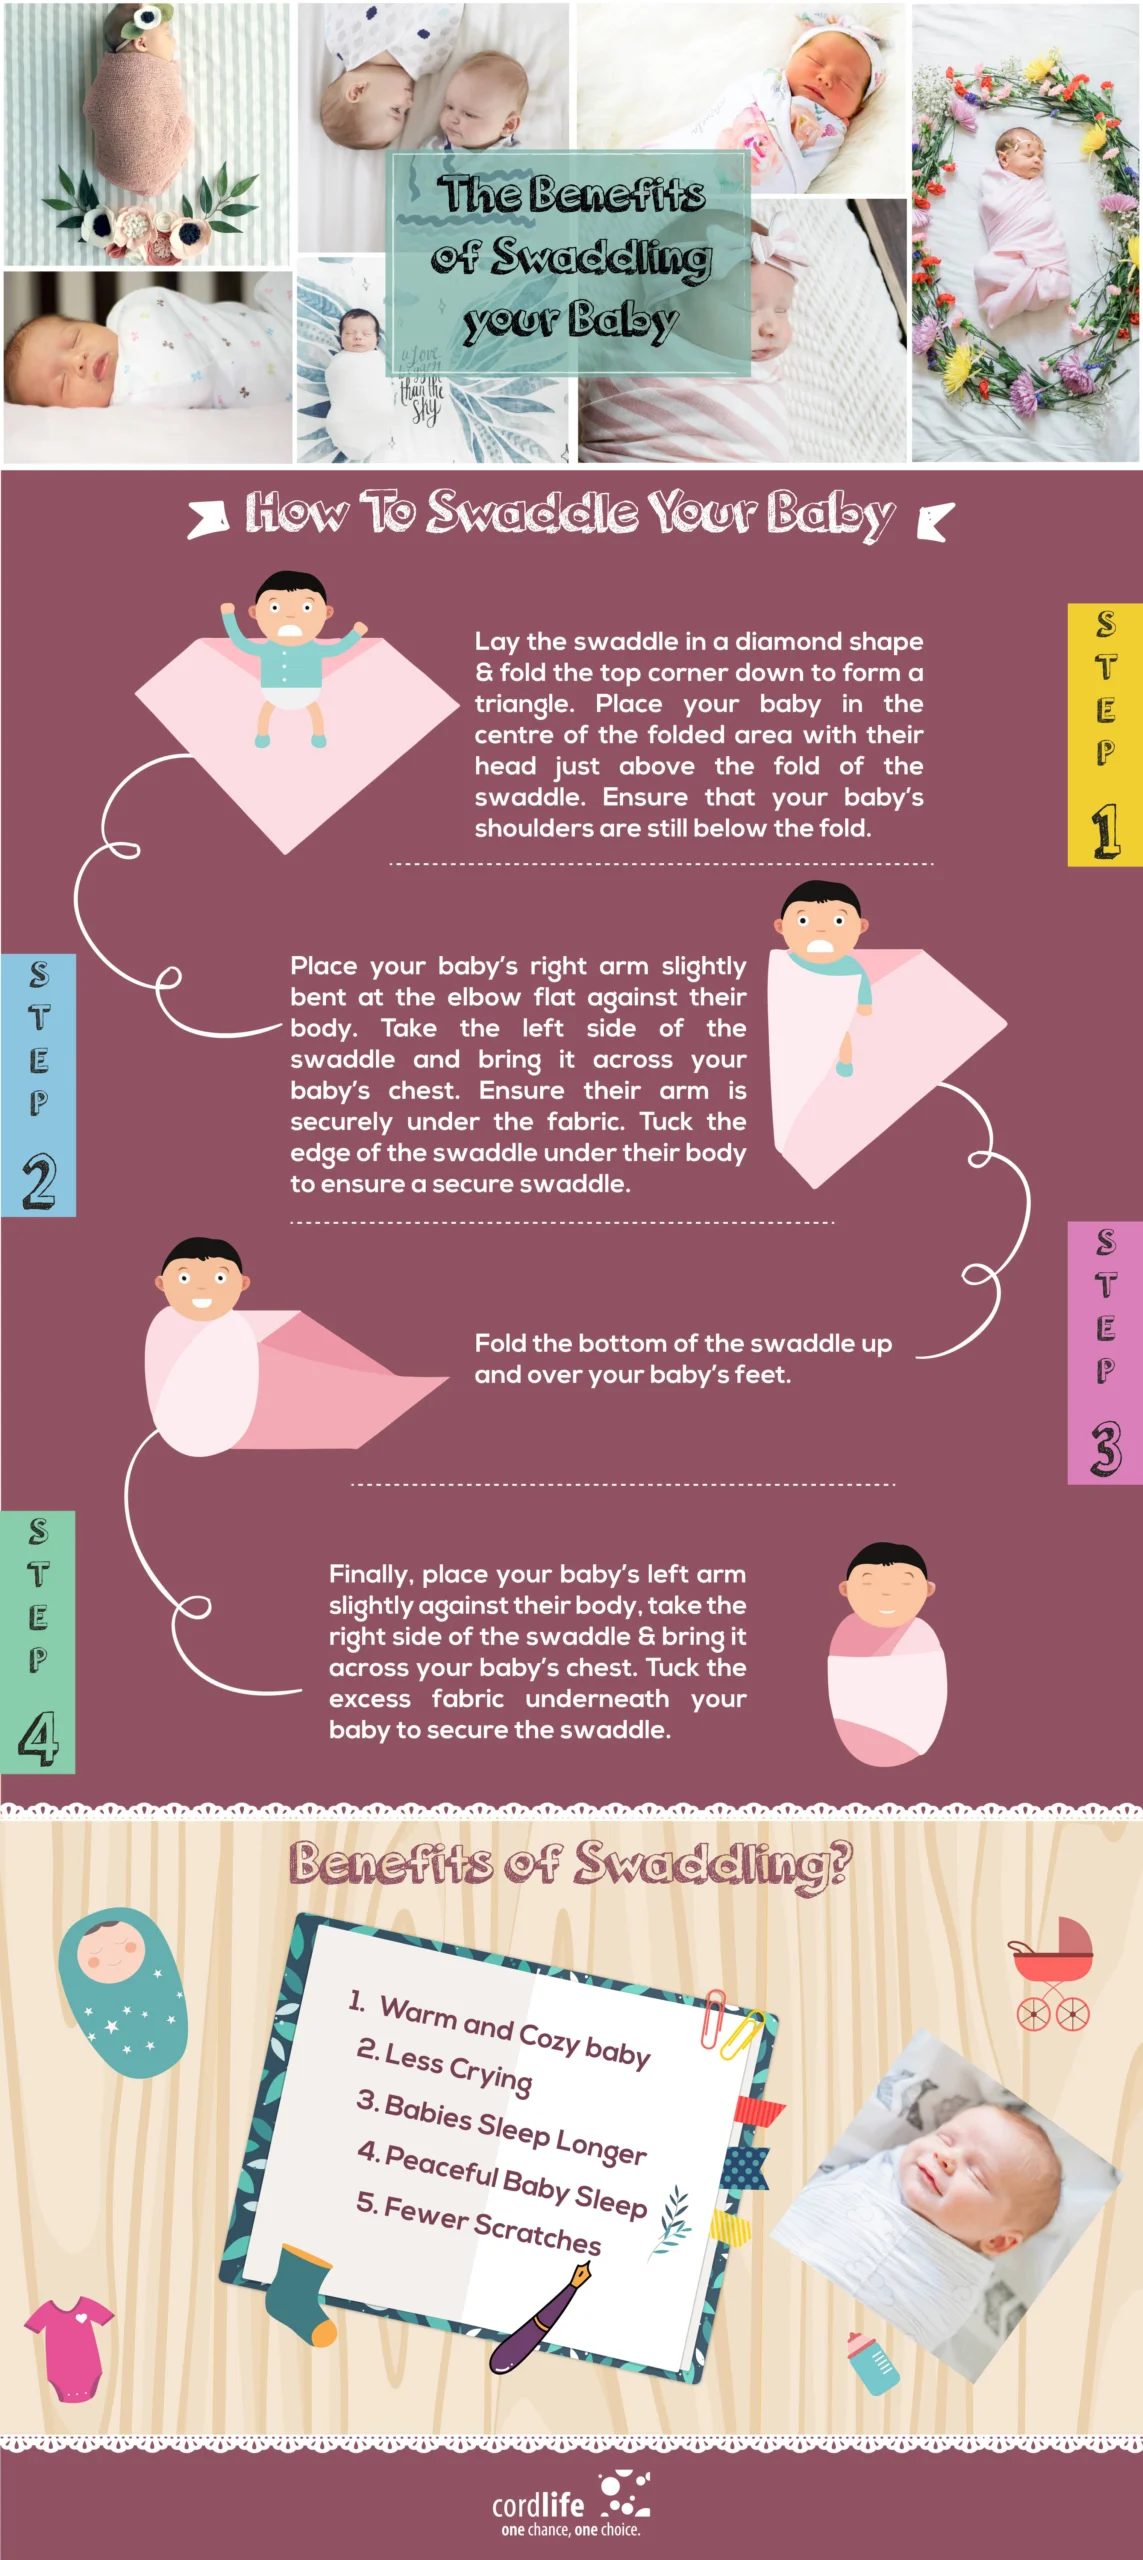 The Benefits Of Swaddling Your Baby